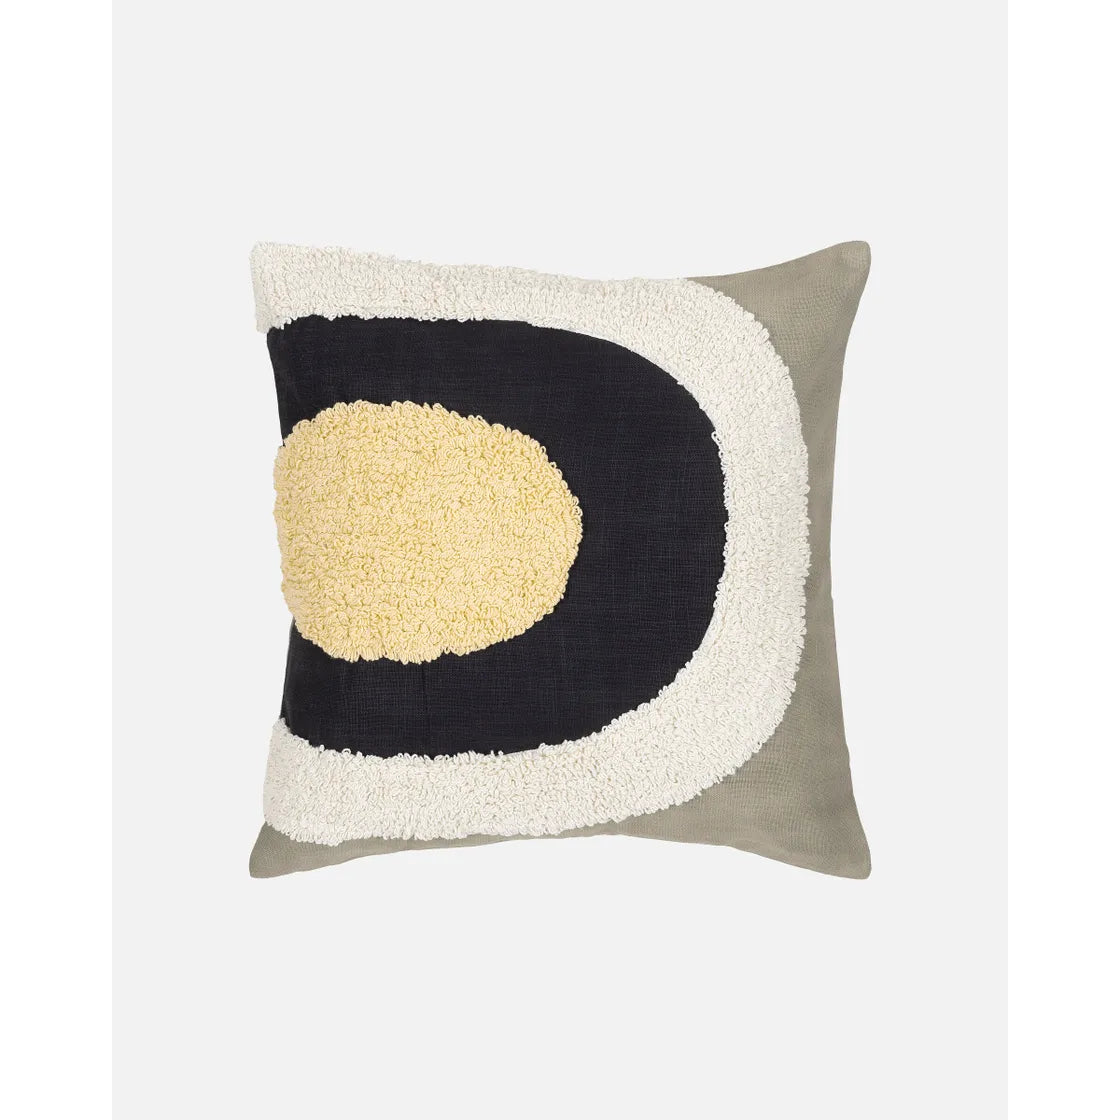 MELOONI CUSHION COVER 50X50 Grey white yellow 071943 918